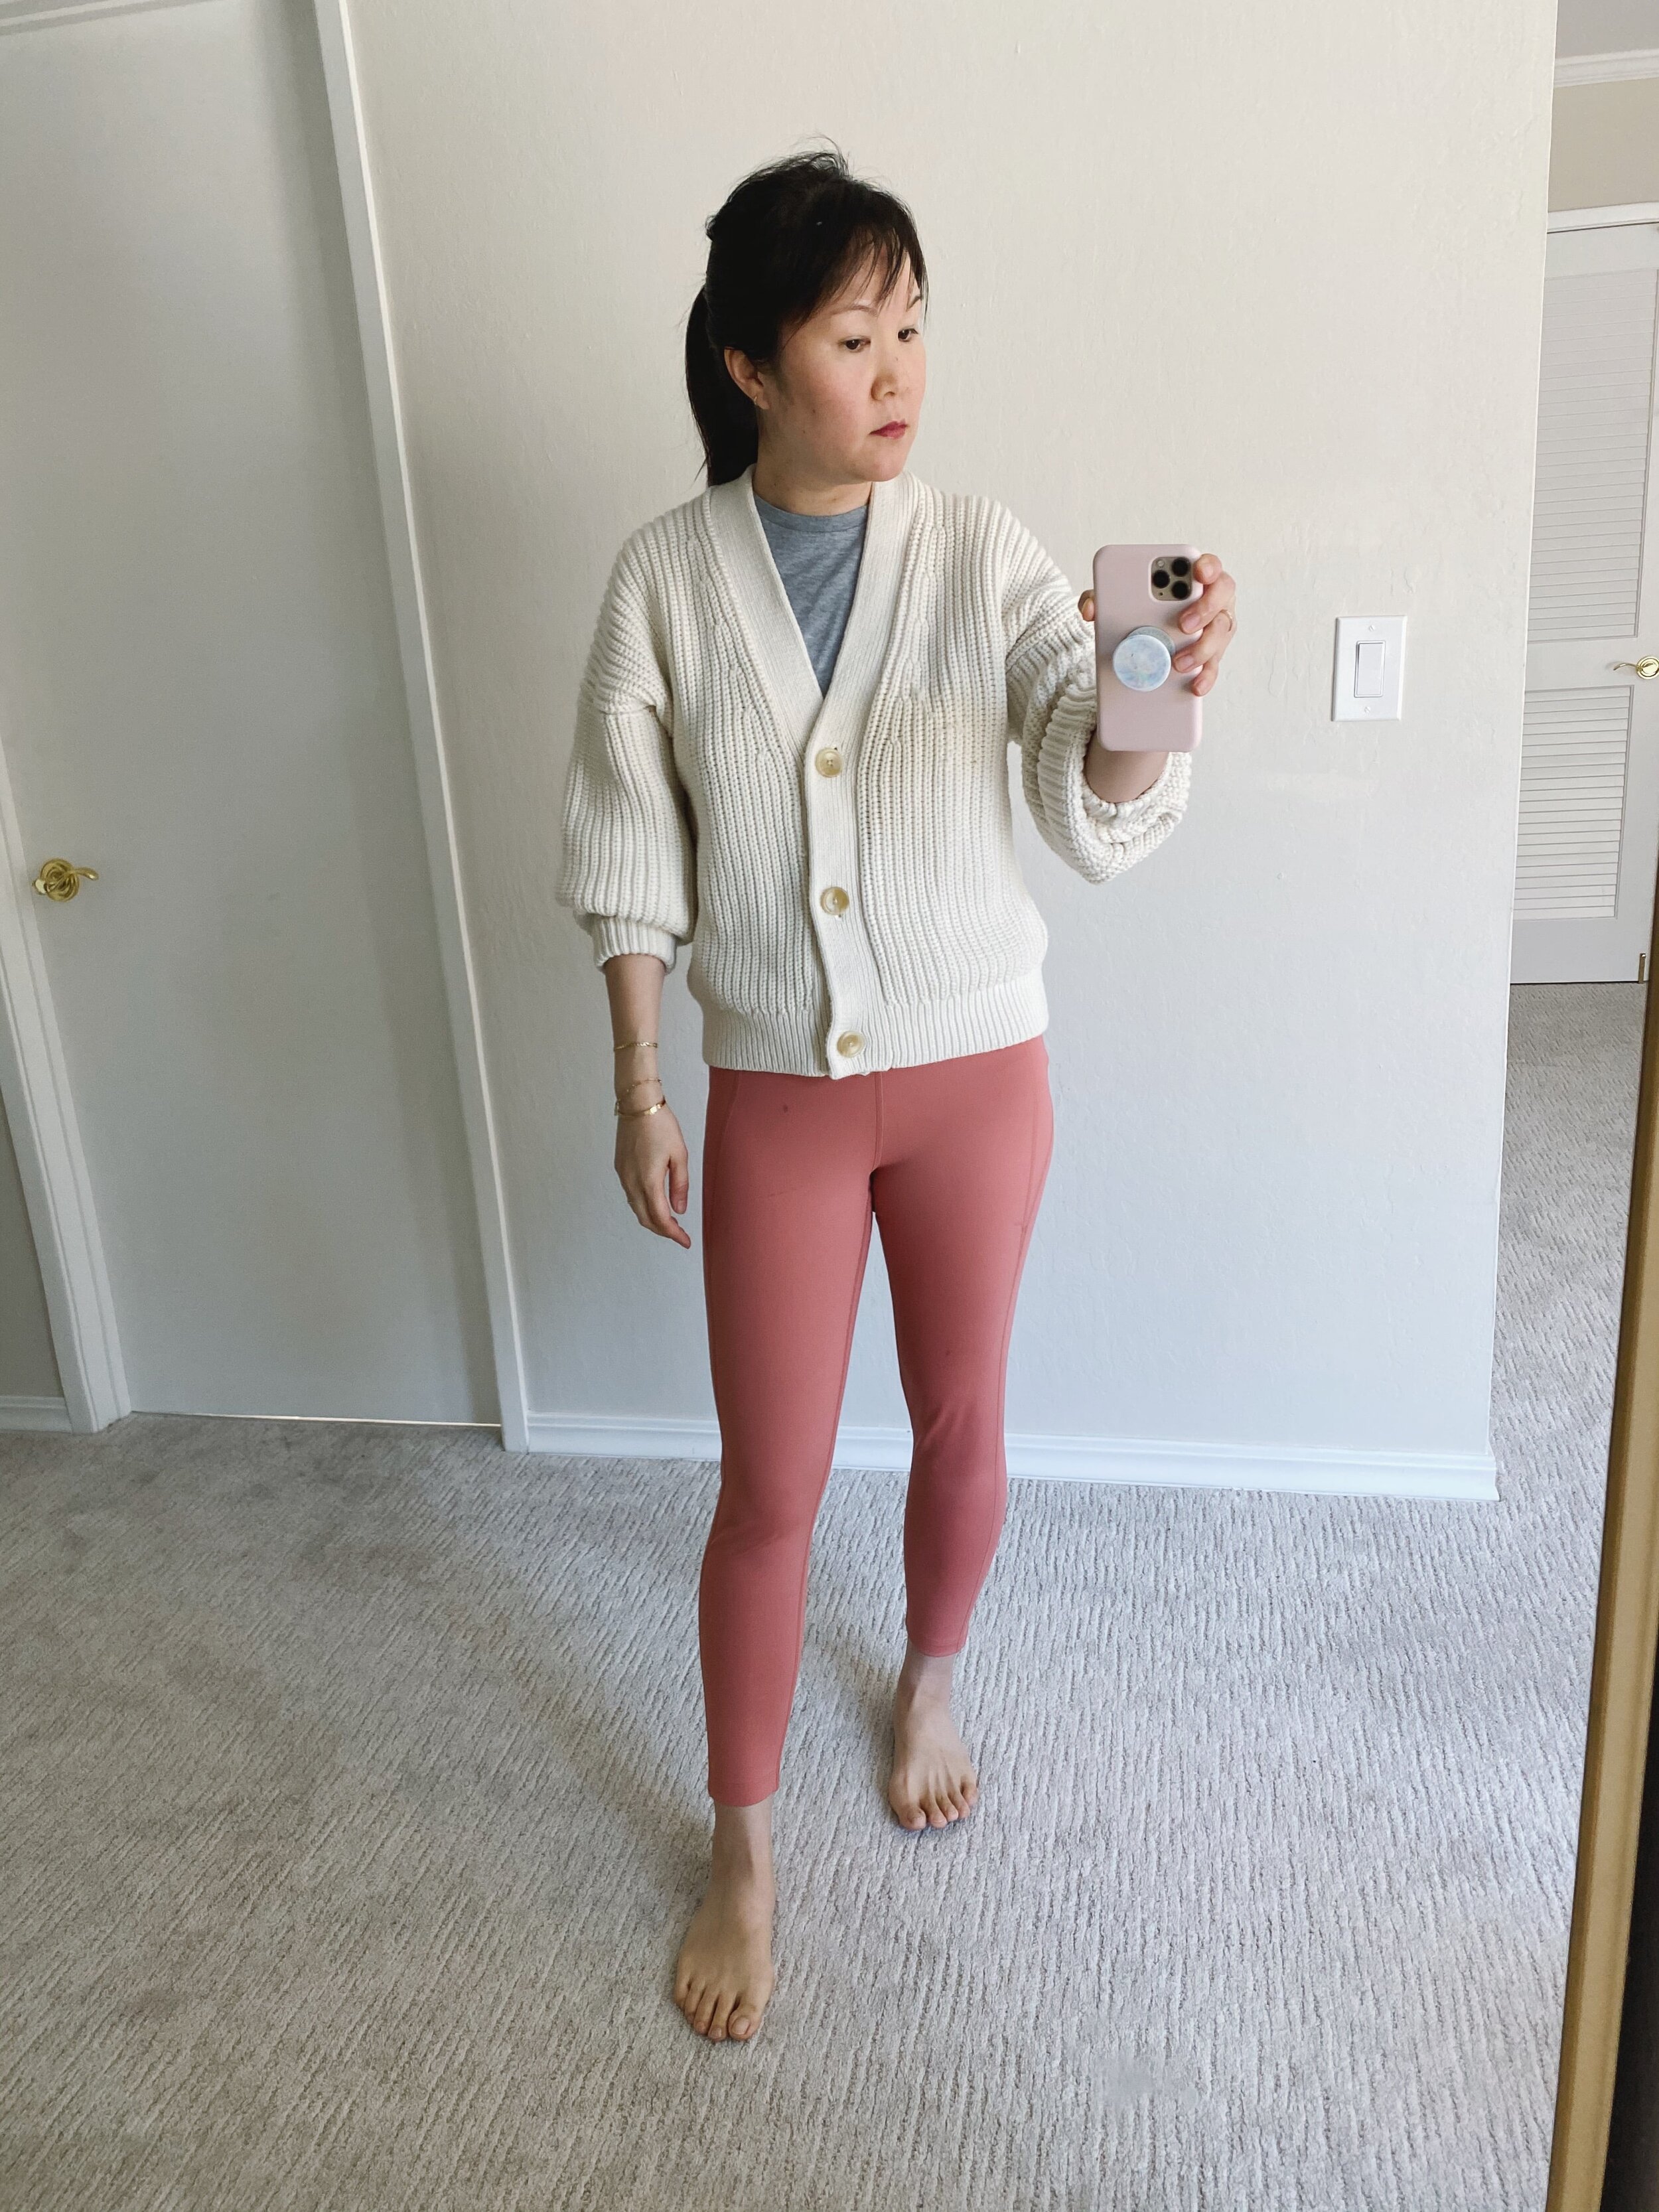 Everlane Perform leggings review: Do they really 'do it all